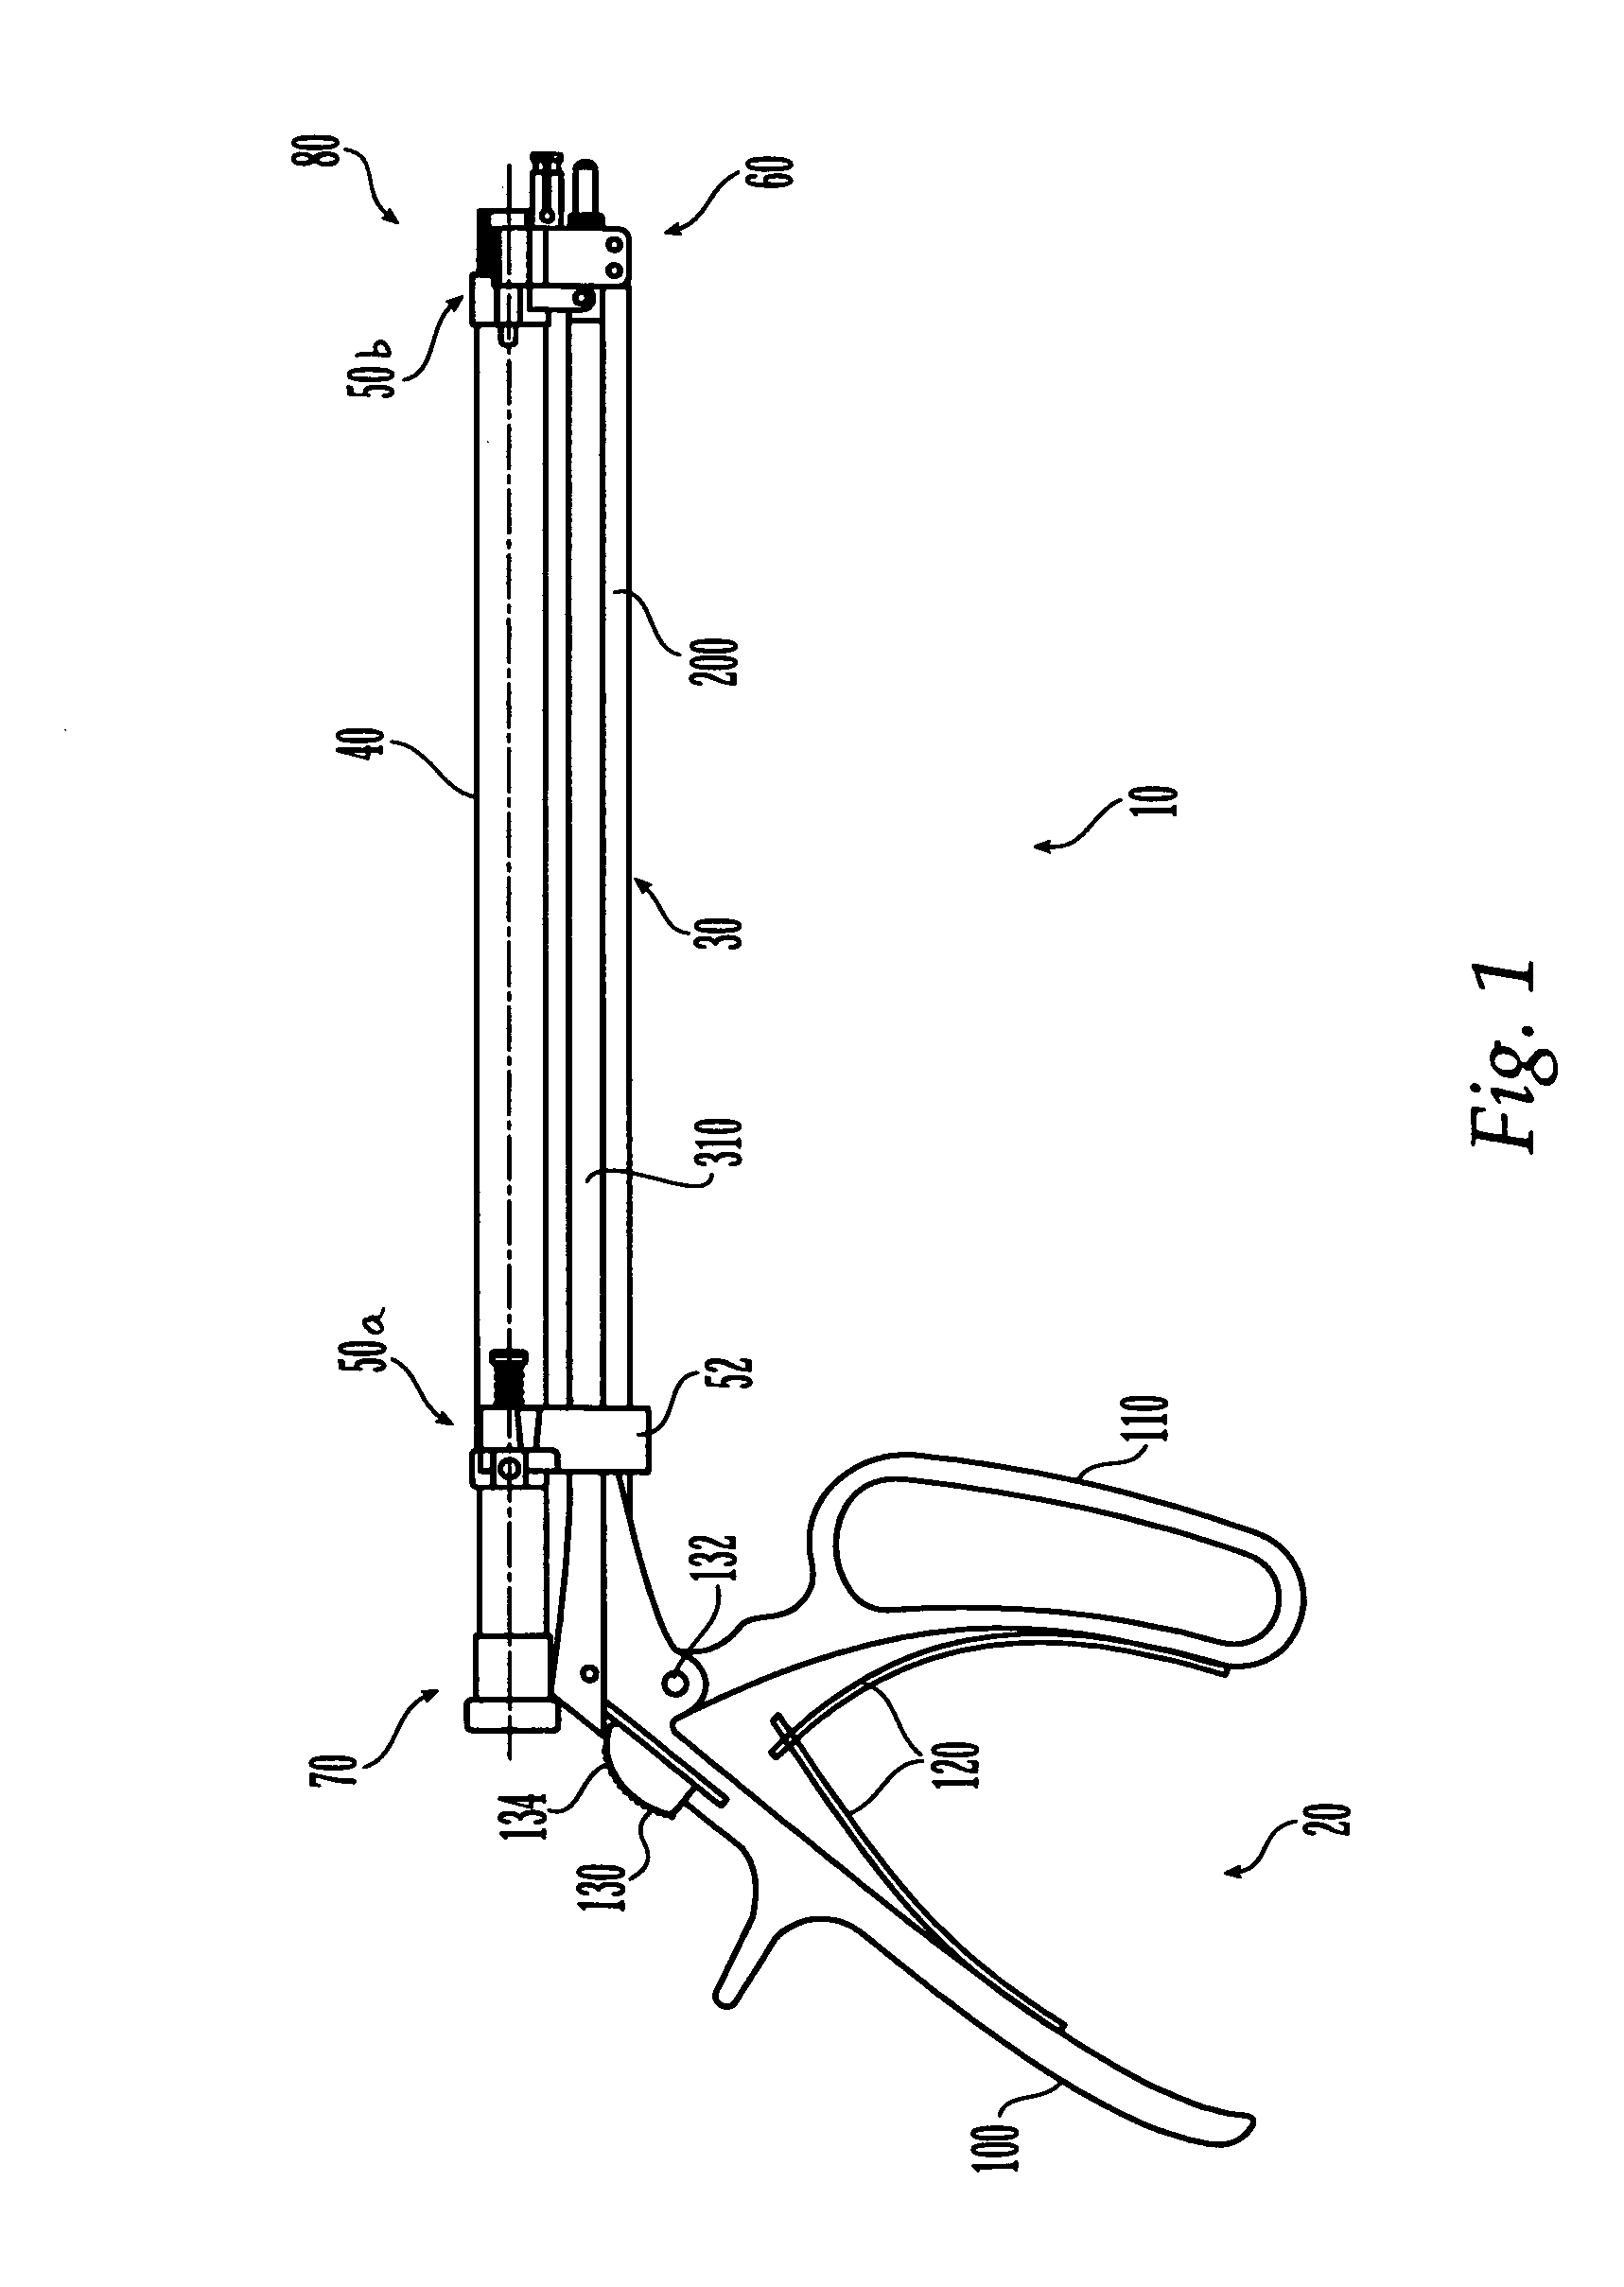 Drill guide assembly for a bone fixation device